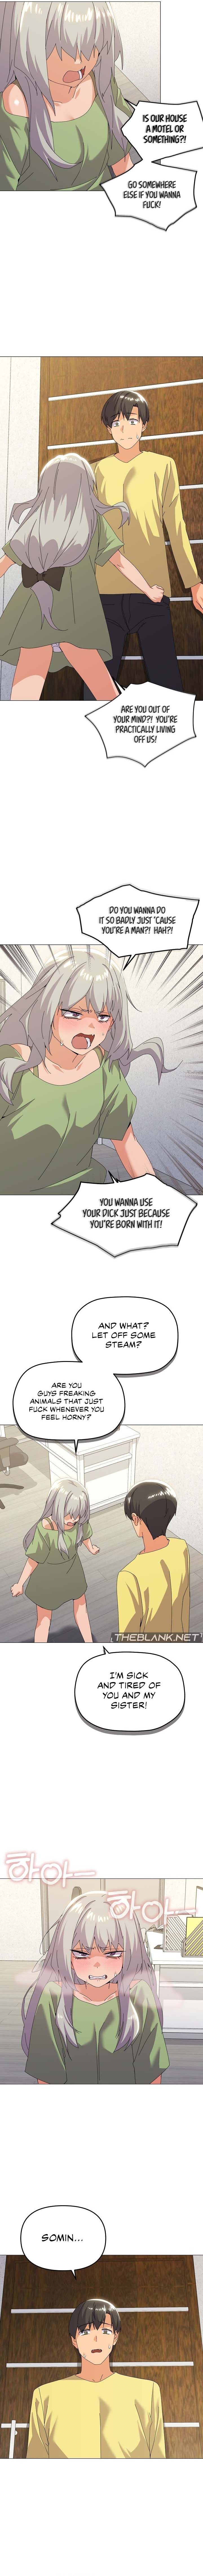 What’s wrong with this family? - Chapter 17 Page 7